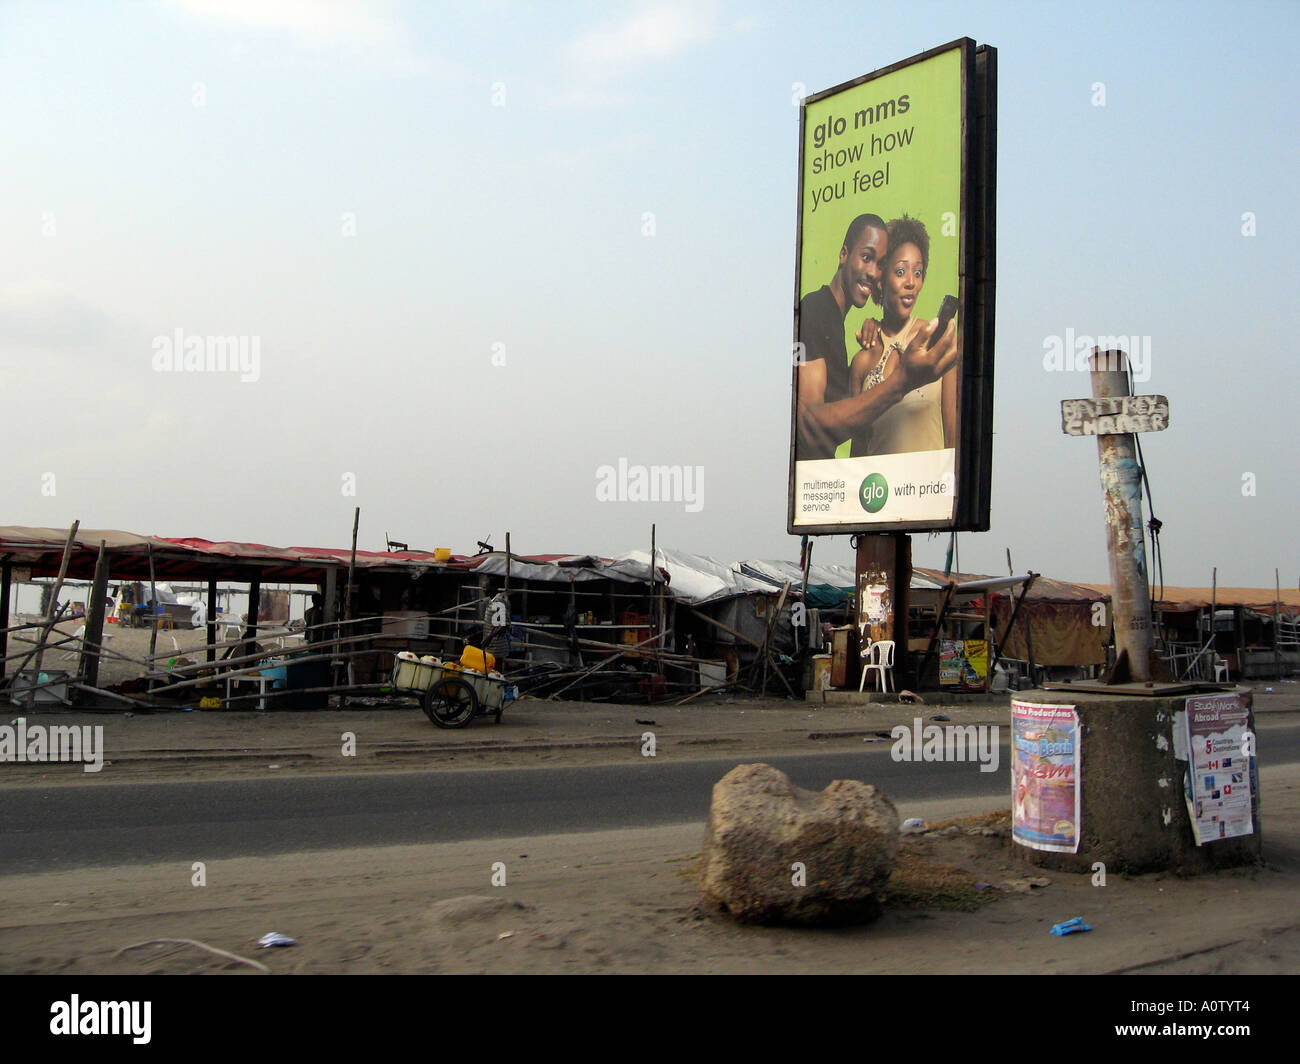 GLO pre pay phone card advertising and shanty bar on beach side road in Lagos Stock Photo